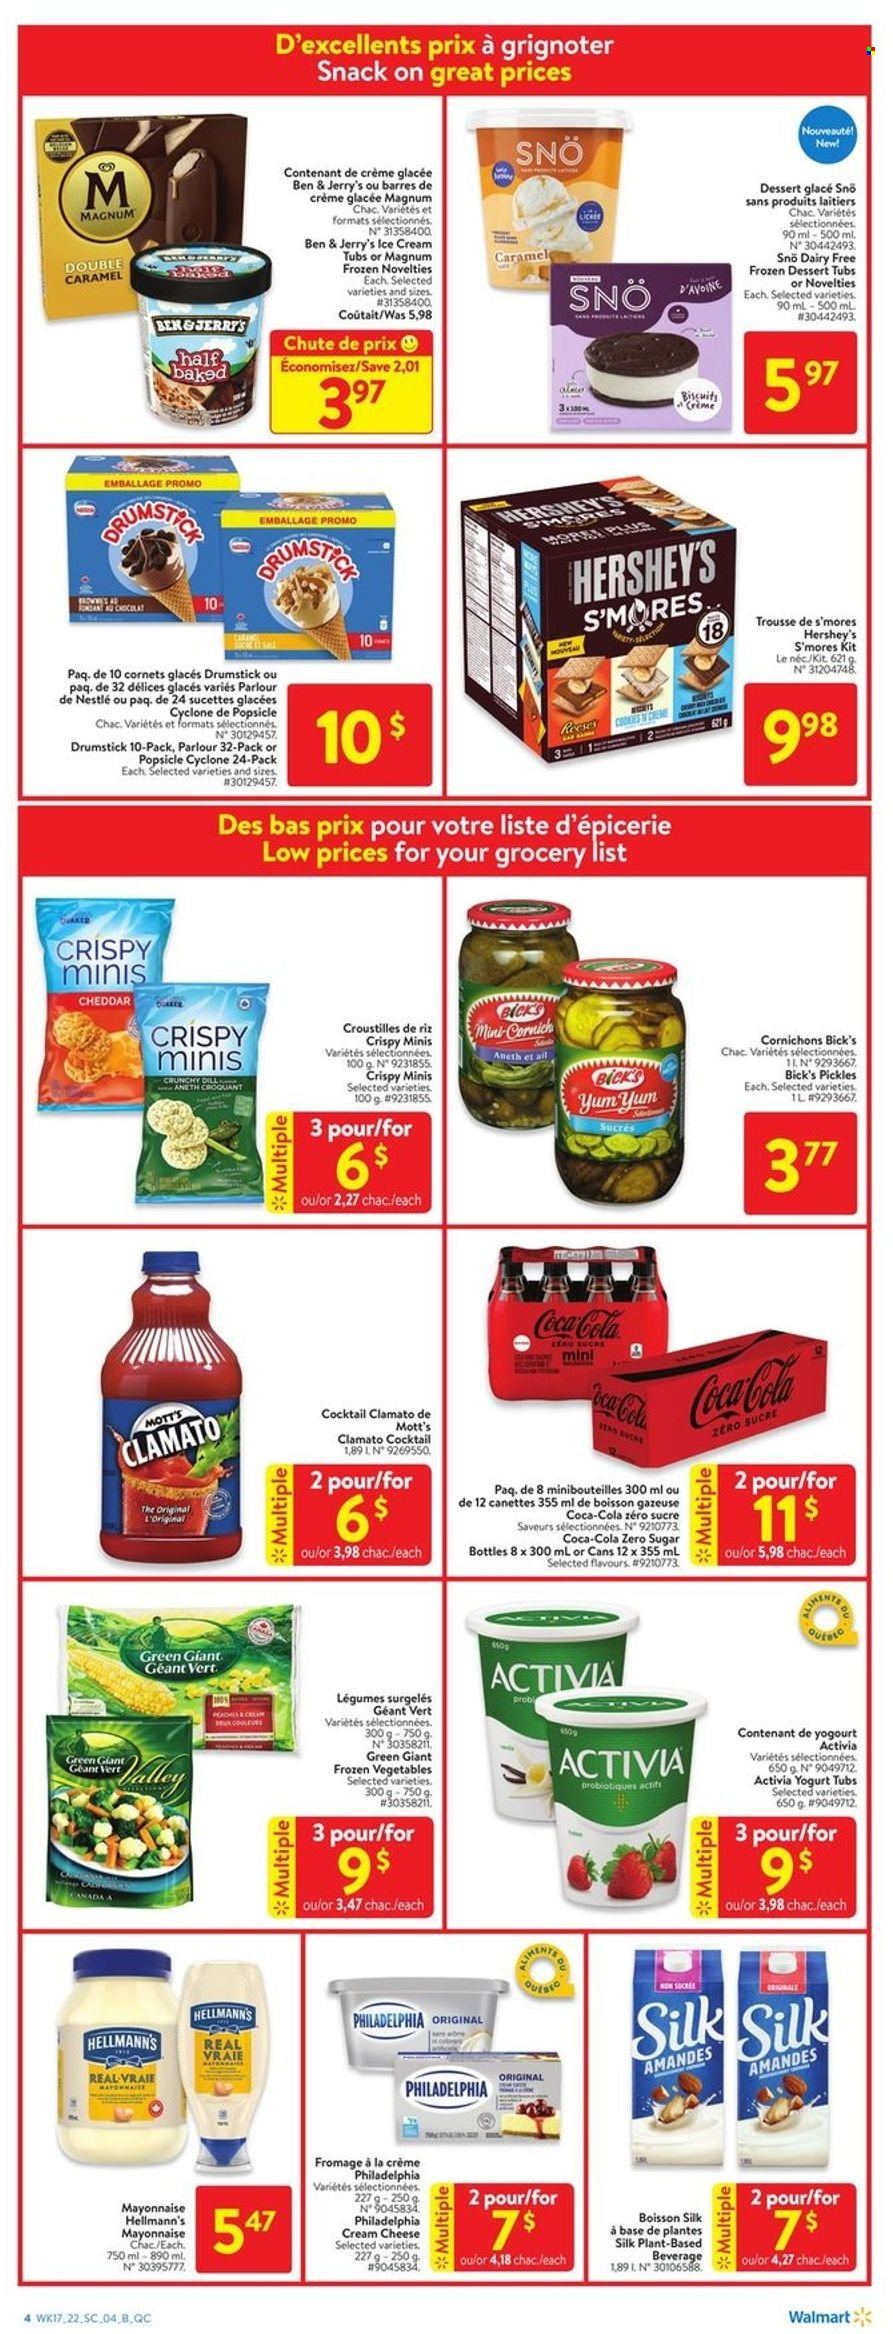 thumbnail - Walmart Flyer - May 19, 2022 - May 25, 2022 - Sales products - Mott's, Quaker, cream cheese, cheddar, cheese, yoghurt, Activia, Silk, mayonnaise, Hellmann’s, Magnum, ice cream, Hershey's, Ben & Jerry's, frozen vegetables, snack, pickles, Coca-Cola, Clamato, Coca-Cola zero, Ron Pelicano, Nestlé, Philadelphia. Page 5.